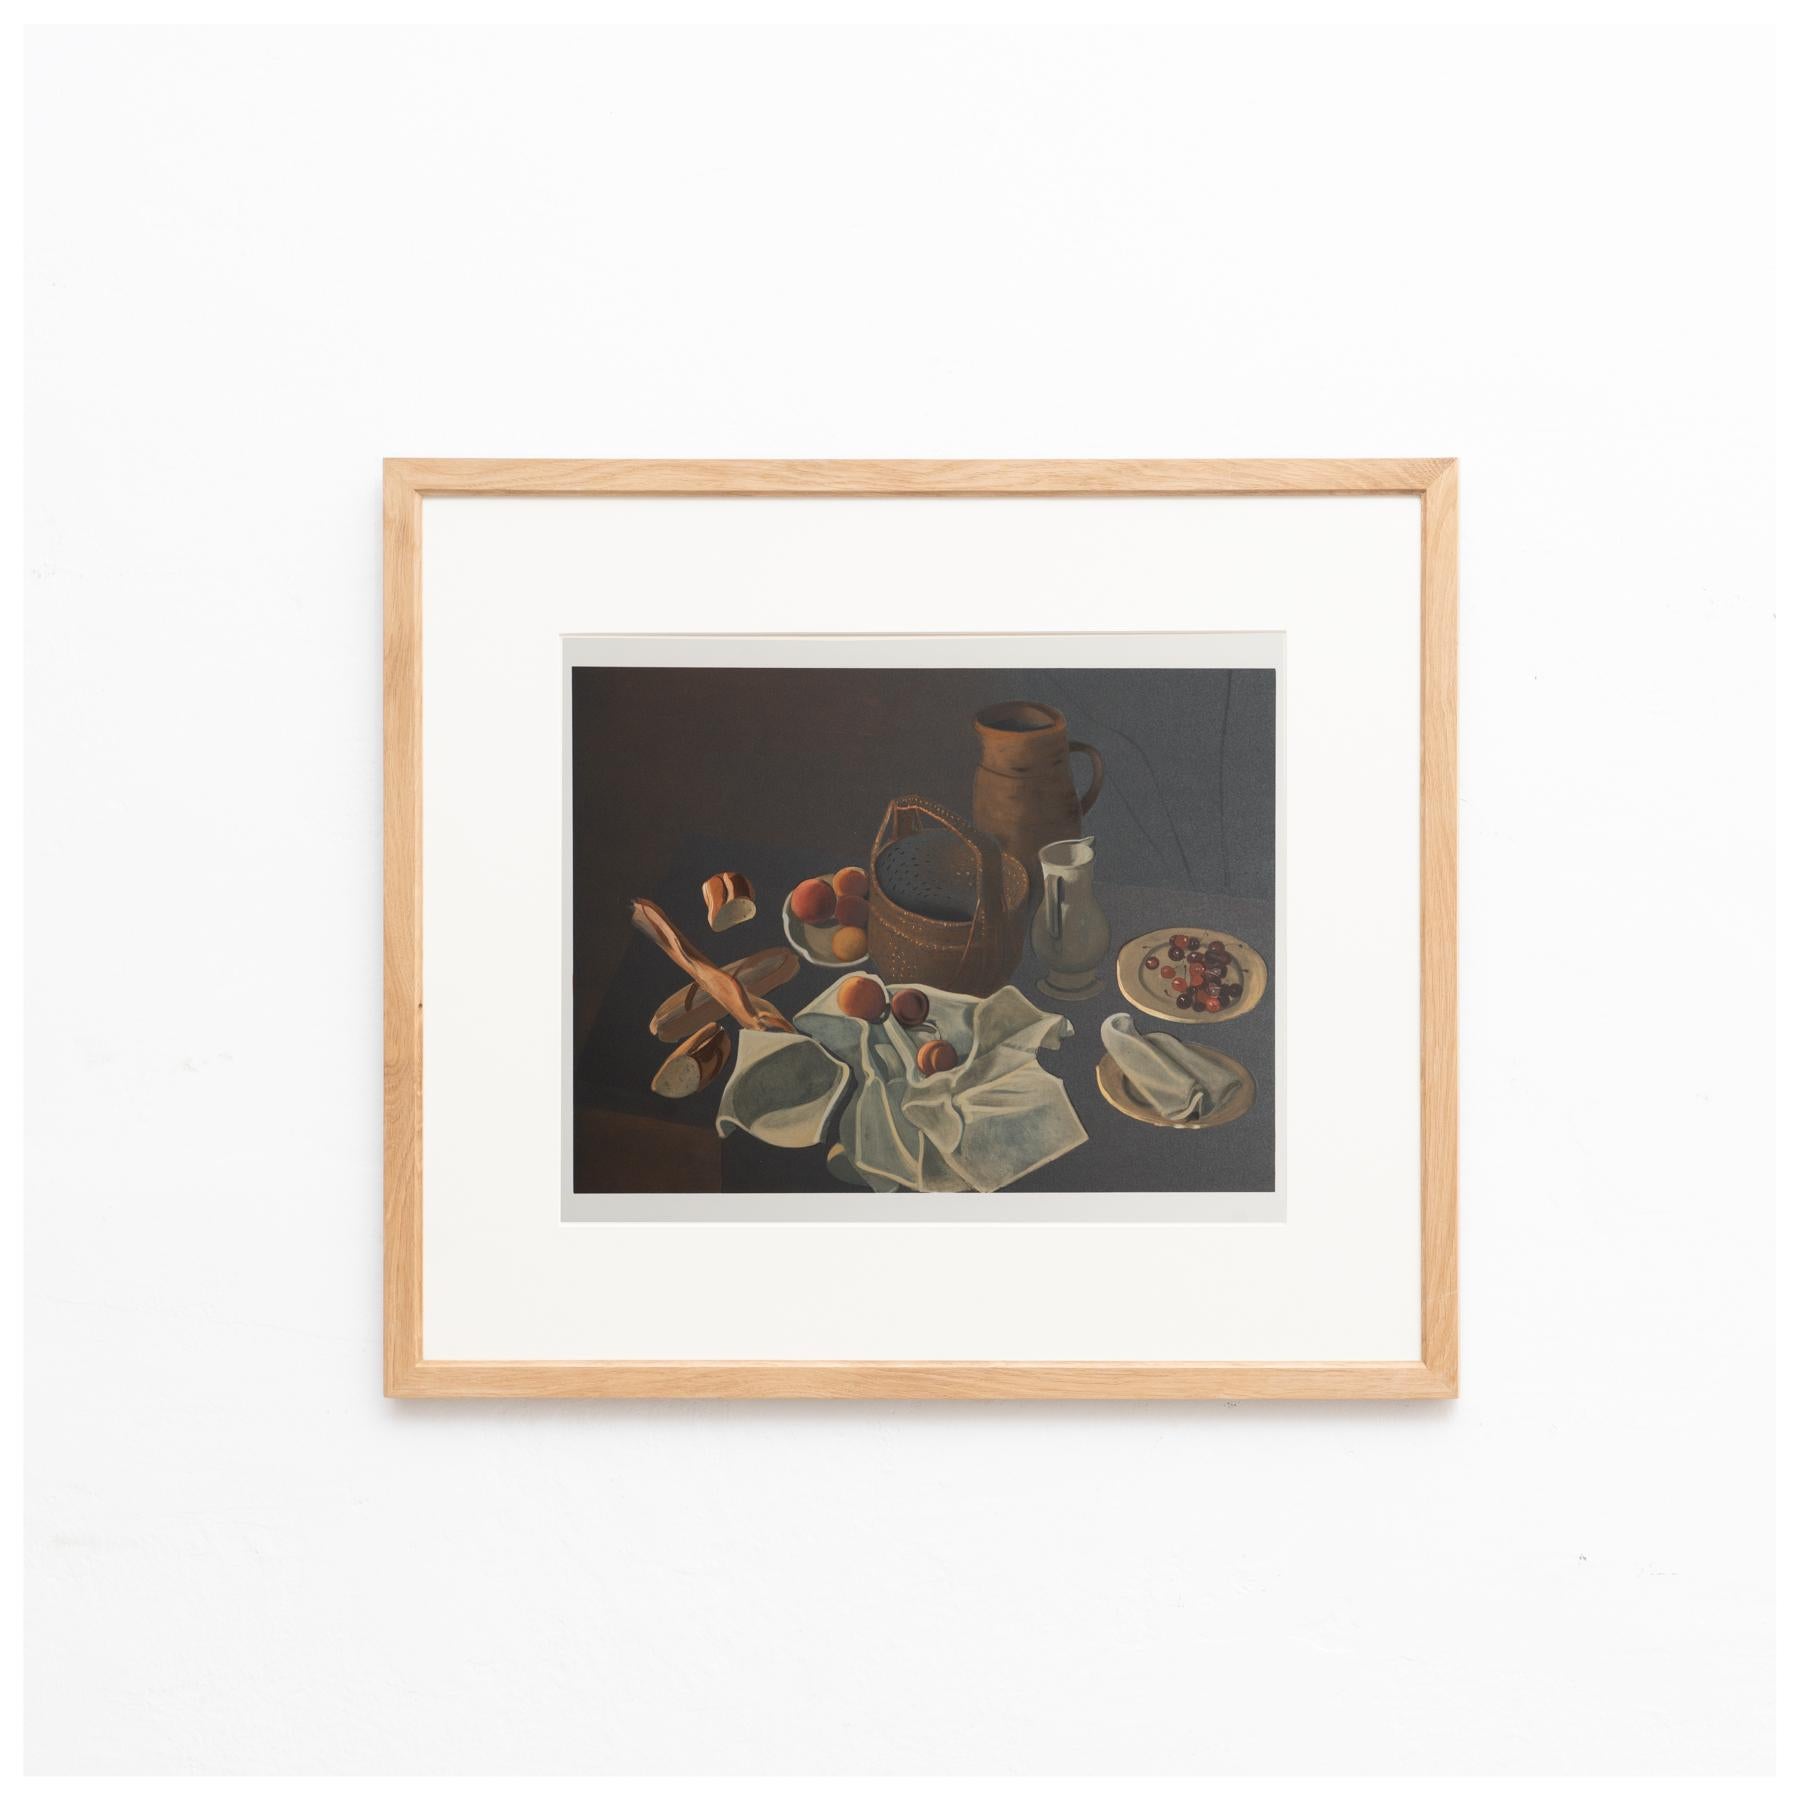 Original 'Nature Morte' color lithograph by André Derain.

Lithograph printed from an original painting made by the author in France, circa 1948.

Published by Mourlot in Collection Pierre Levy in 1970, Paris. 

Framed and signed in the